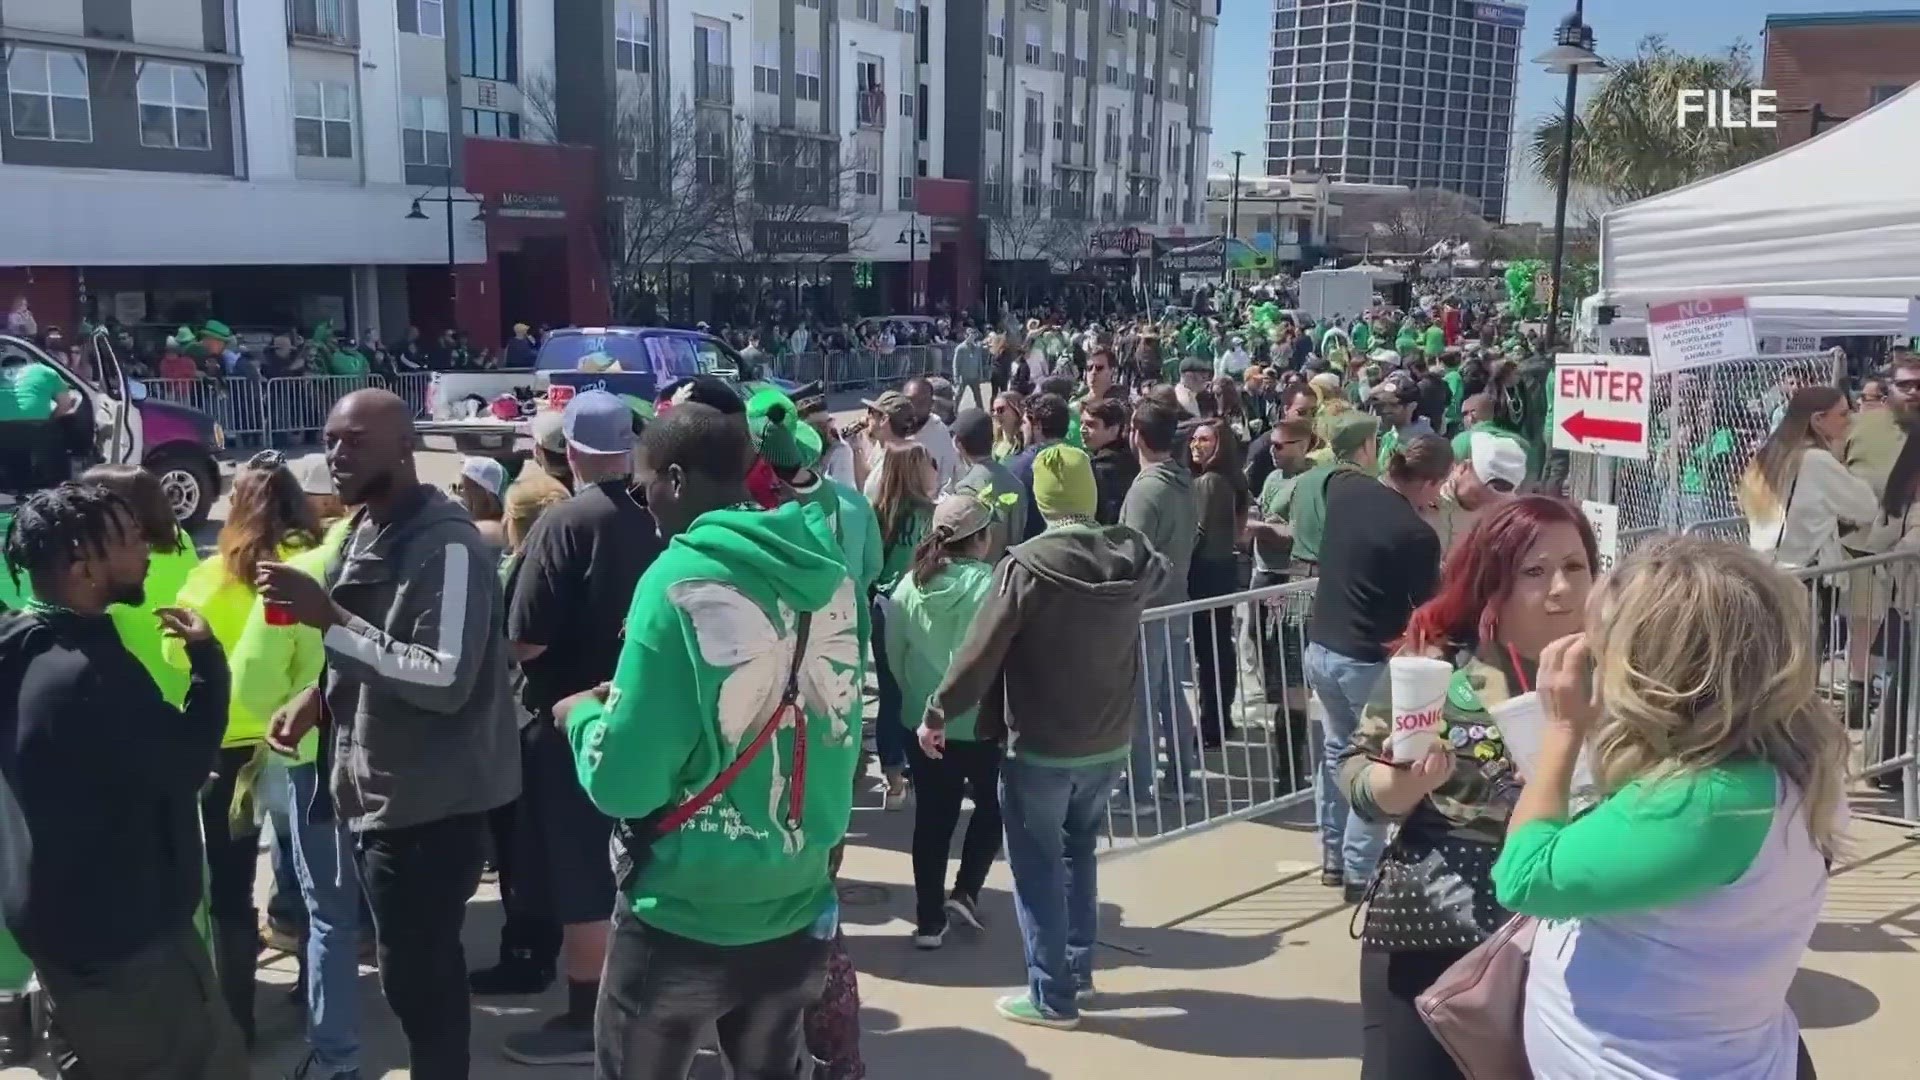 Still two days out from the annual Dallas St. Patrick’s Day Parade, tents, signs and even portable toilets were lining up along Greenville Avenue Thursday.